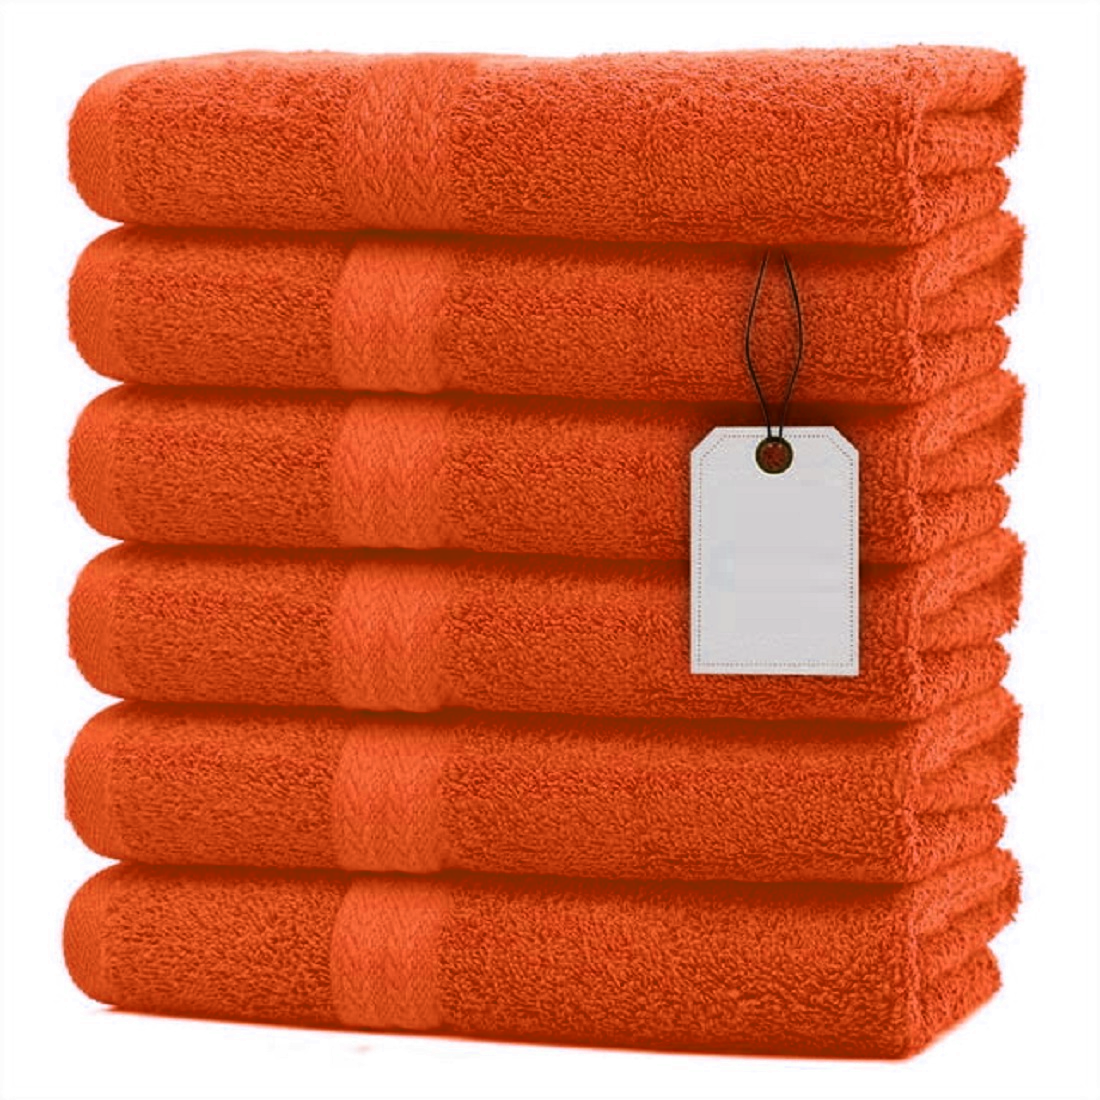 Pack of 3 & 6 Large Bath Sheets / Bathroom Towels, 100% Cotton